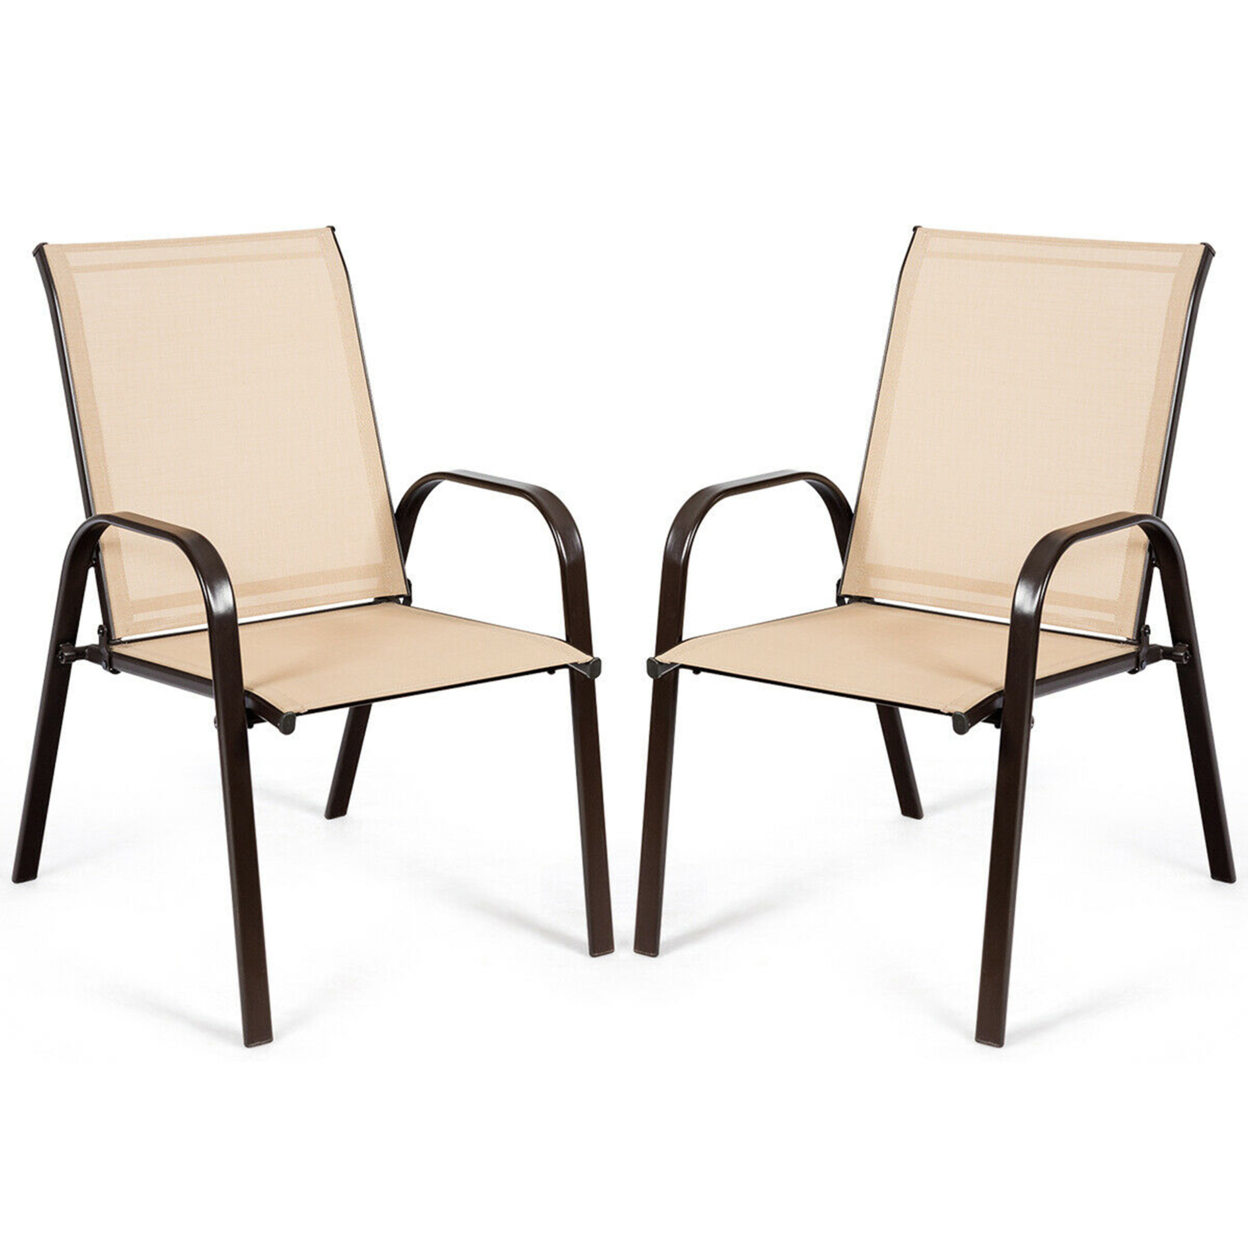 Gymax Set Of 2 Patio Chairs Dining Chairs Garden Outdoor W/ Armrest Steel Frame